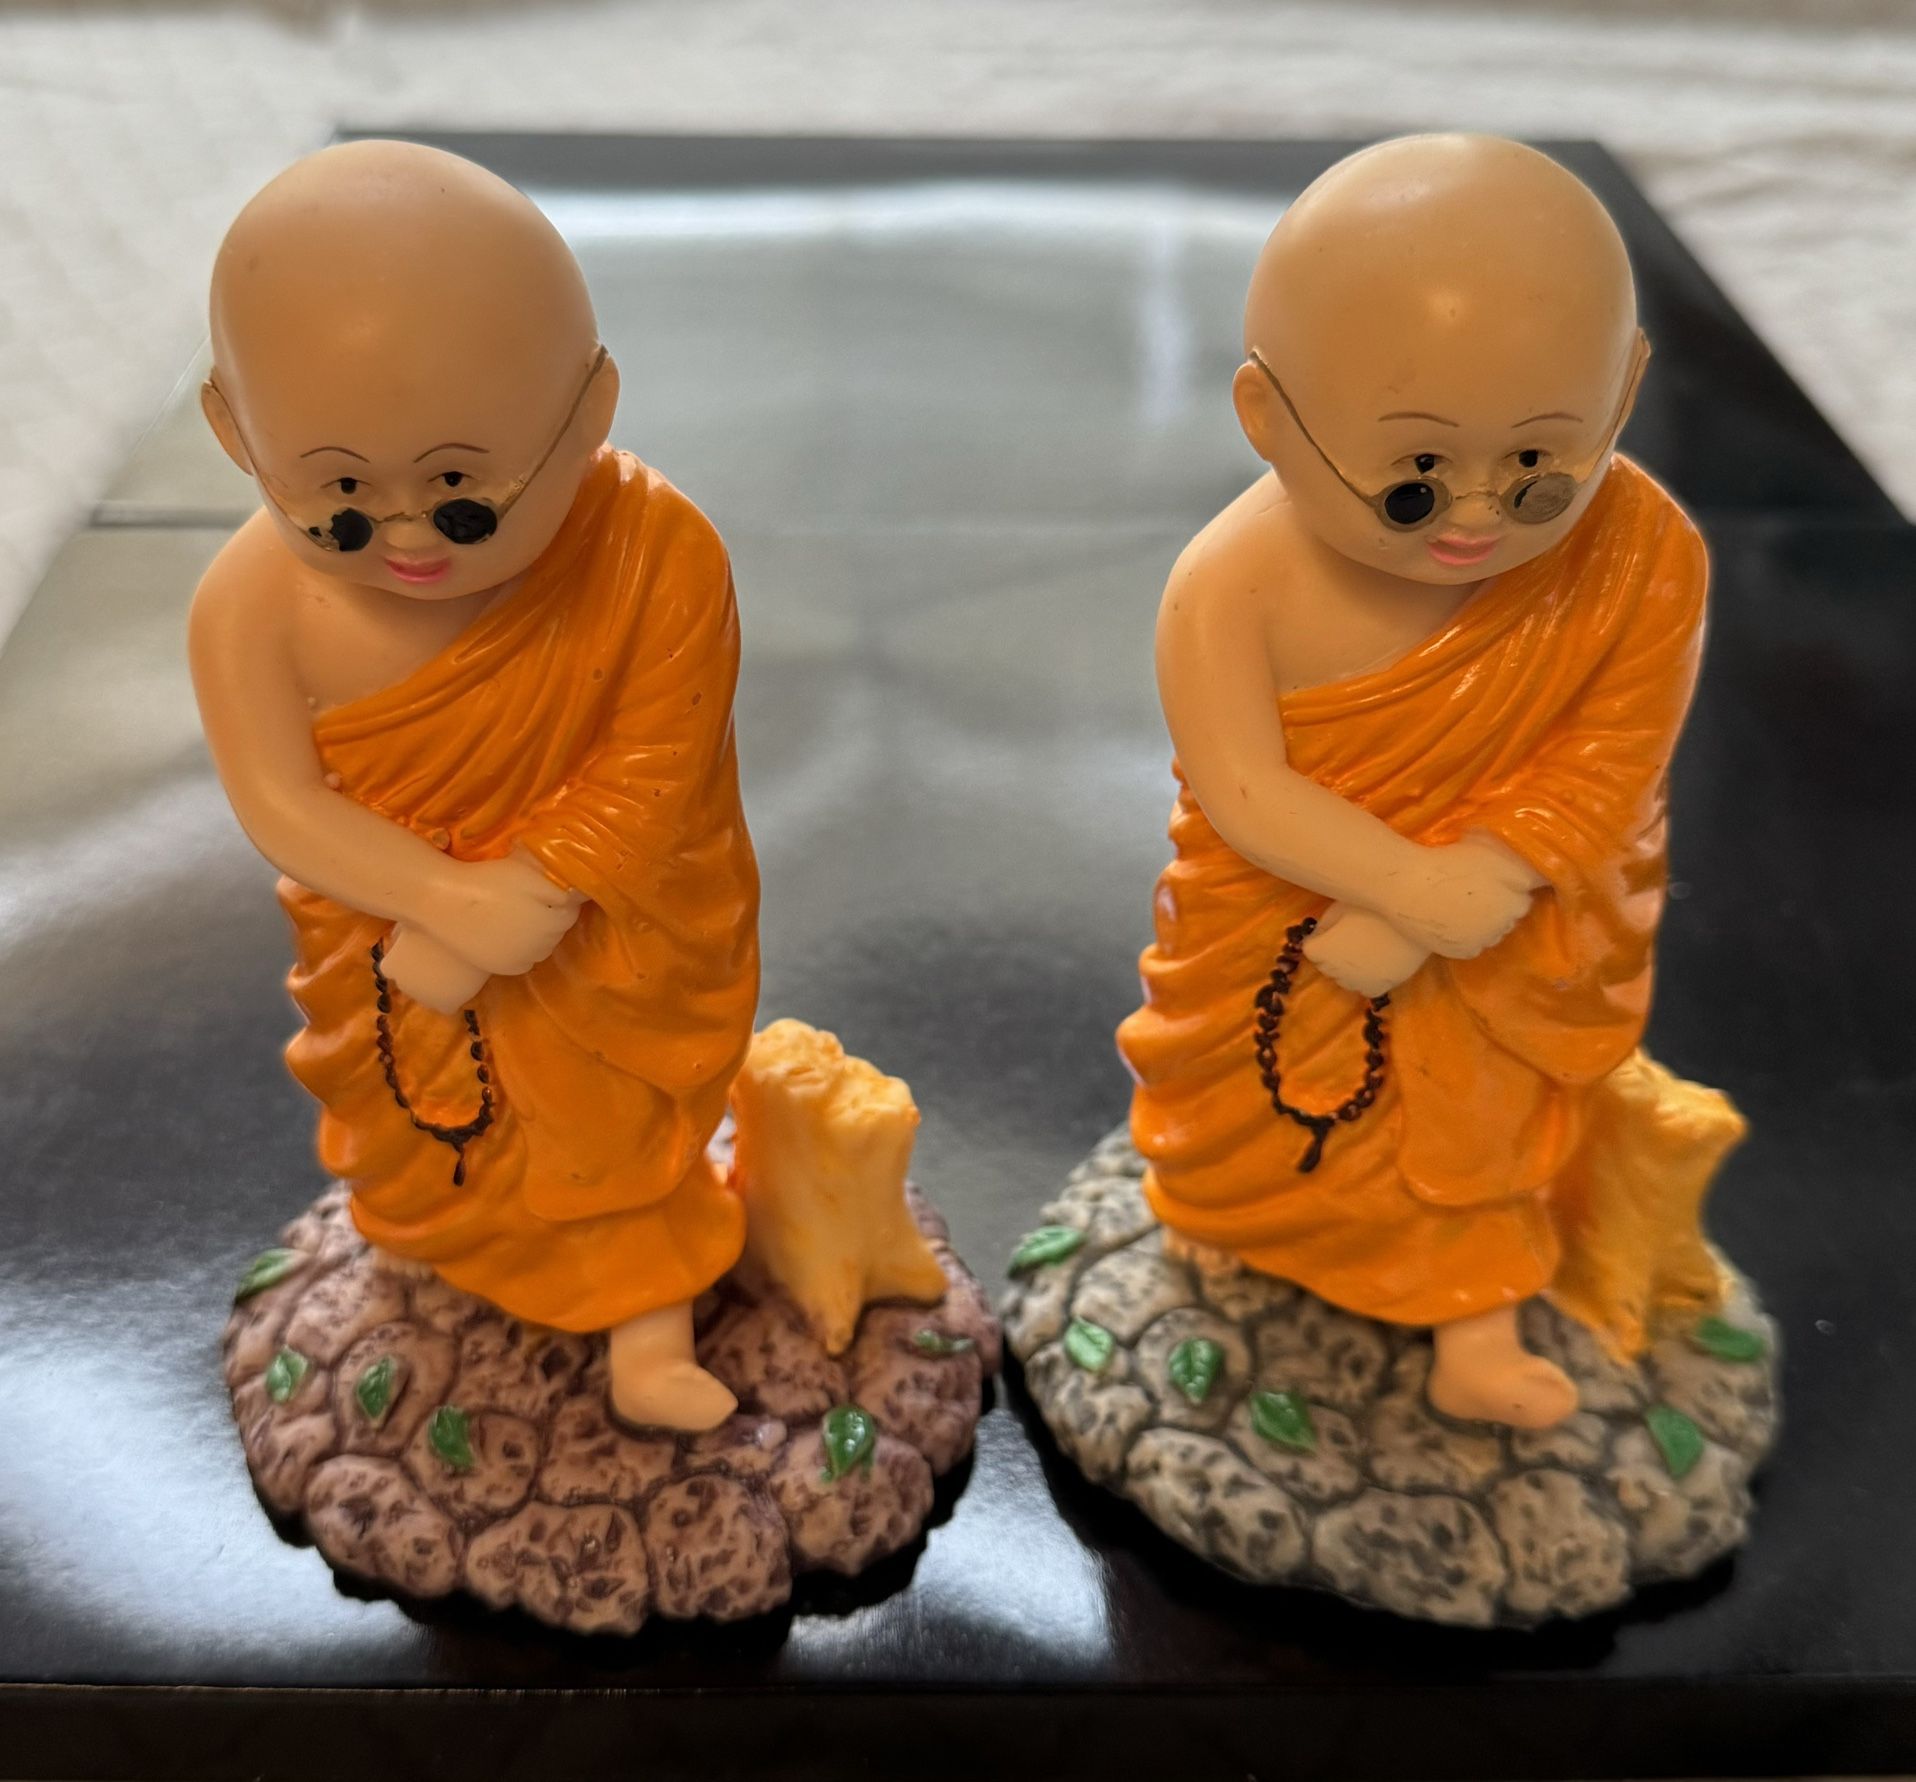 Brand New Buddha Monk Baby Statue Figurine Standing 4” - 5” inches $6 Each !!!ACCEPTING OFFERS!!!